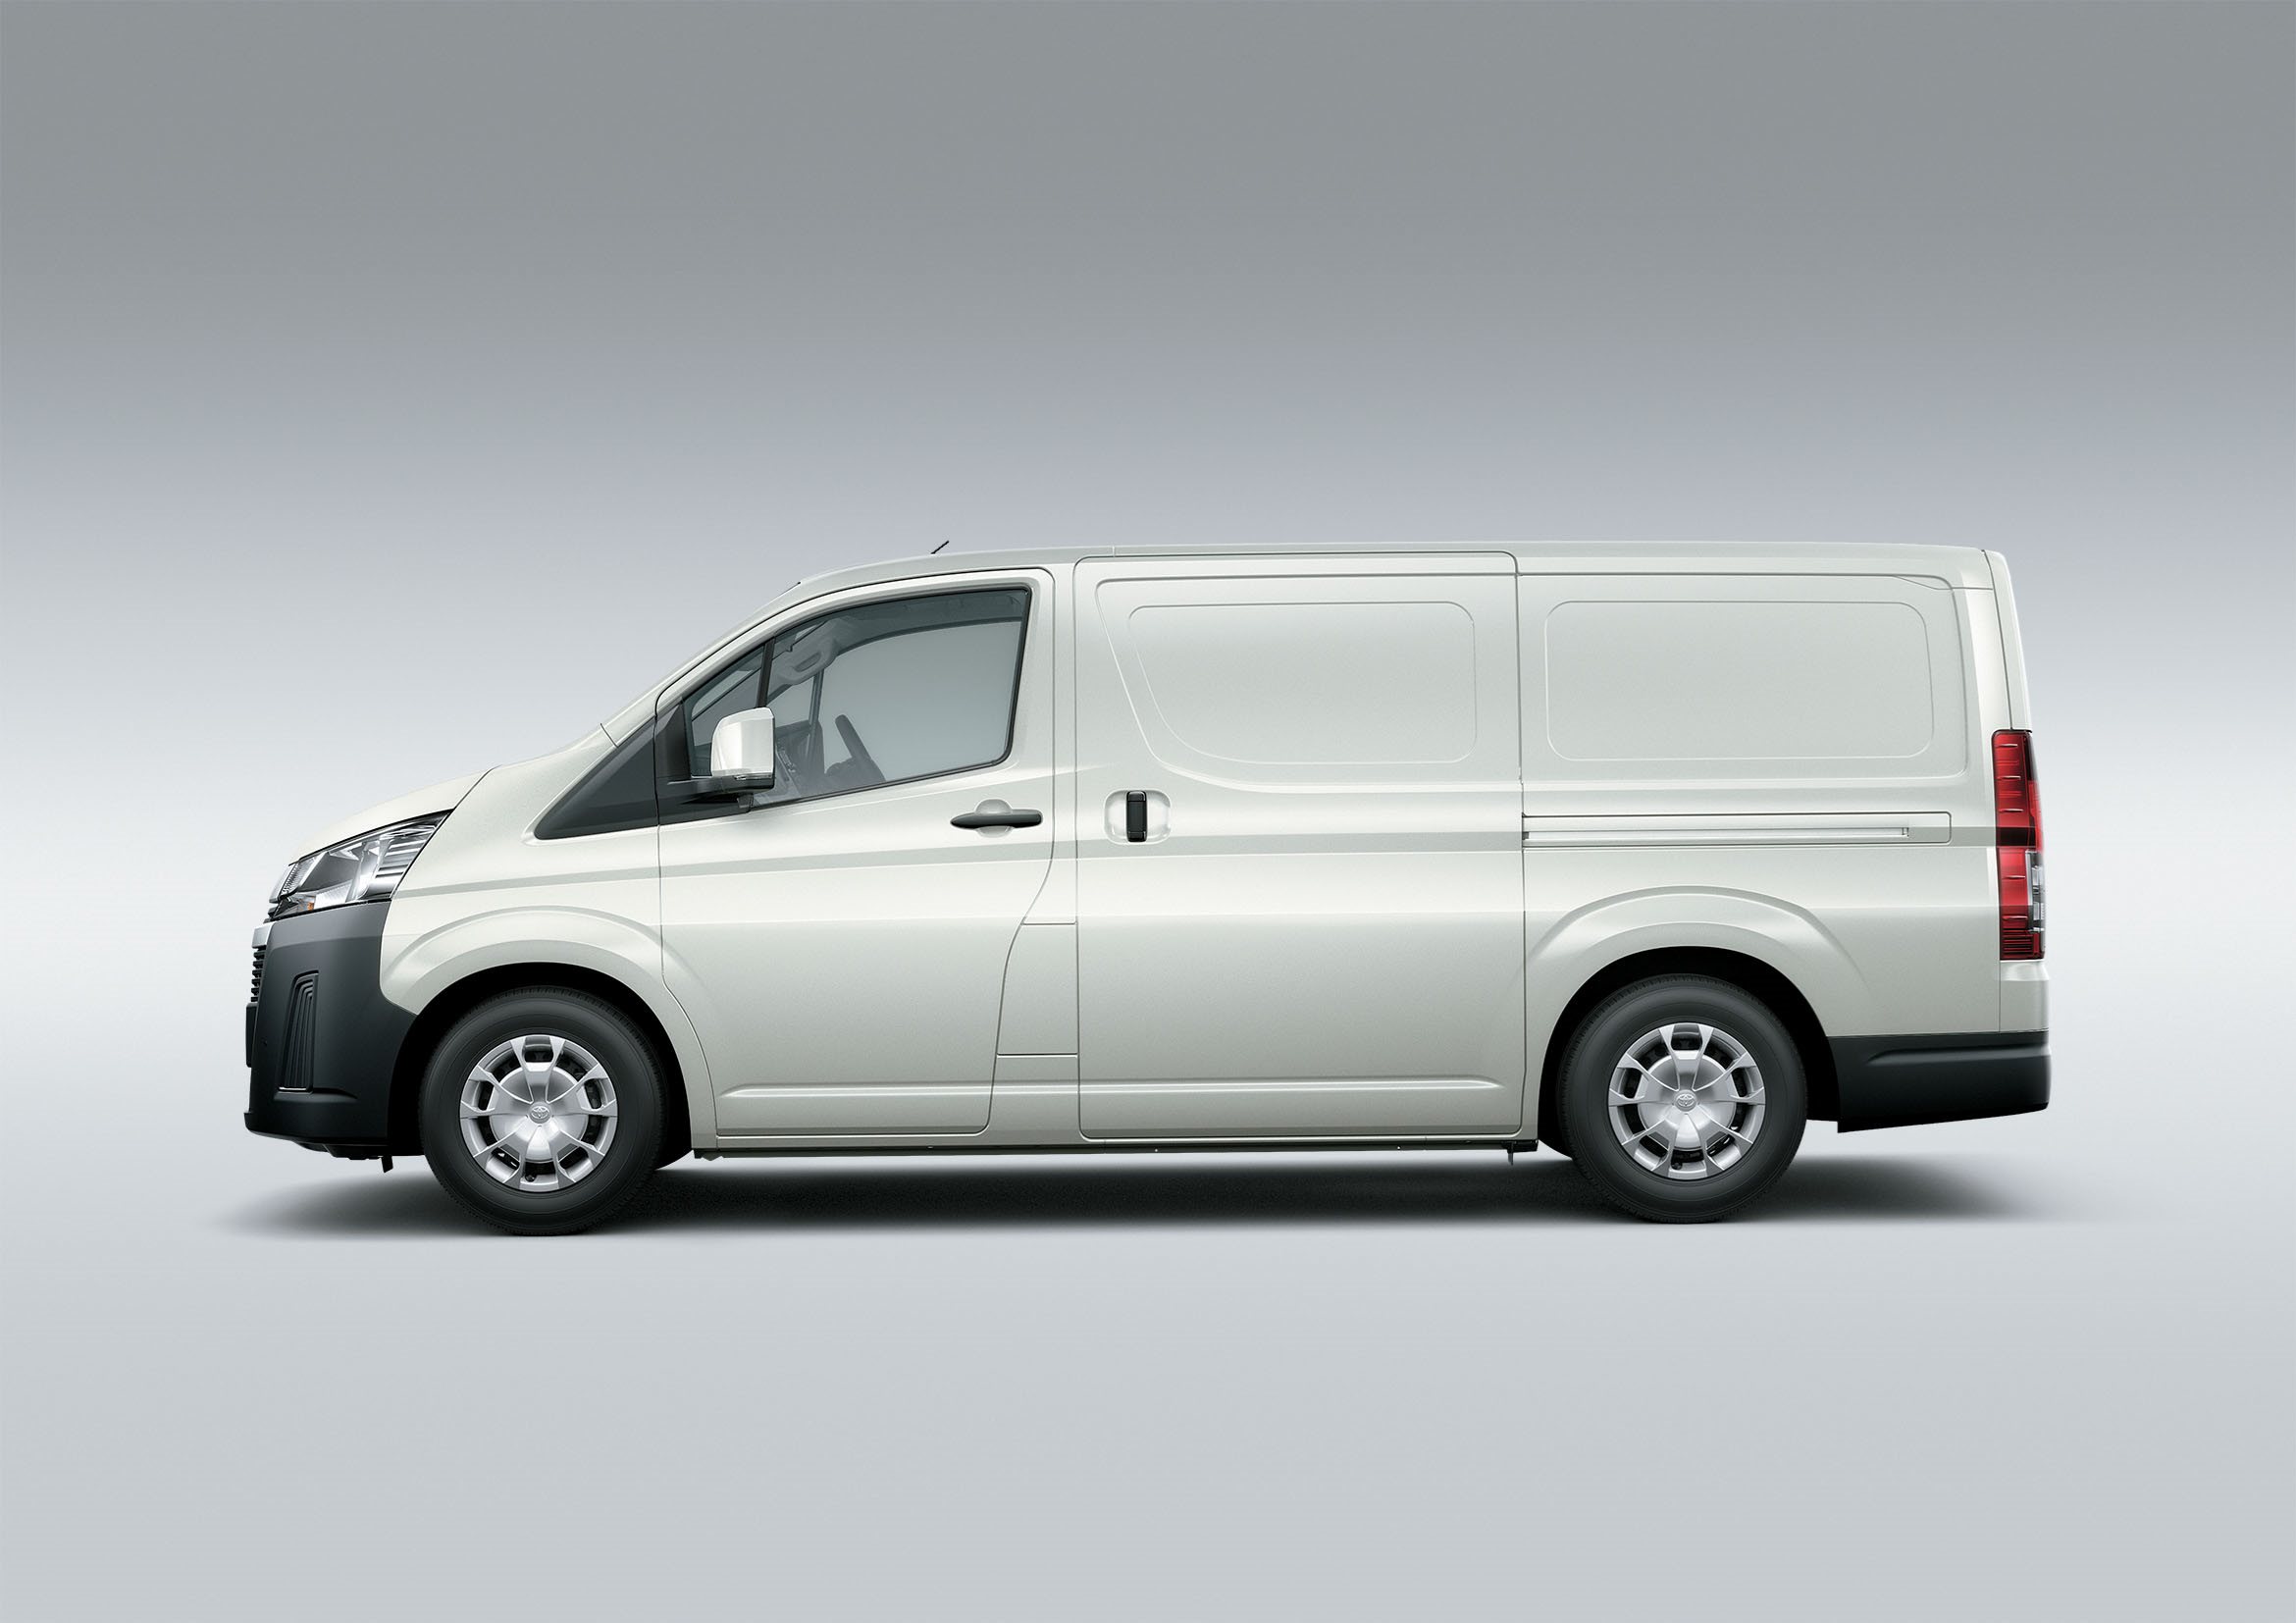 2020 Toyota Hiace Officially Revealed